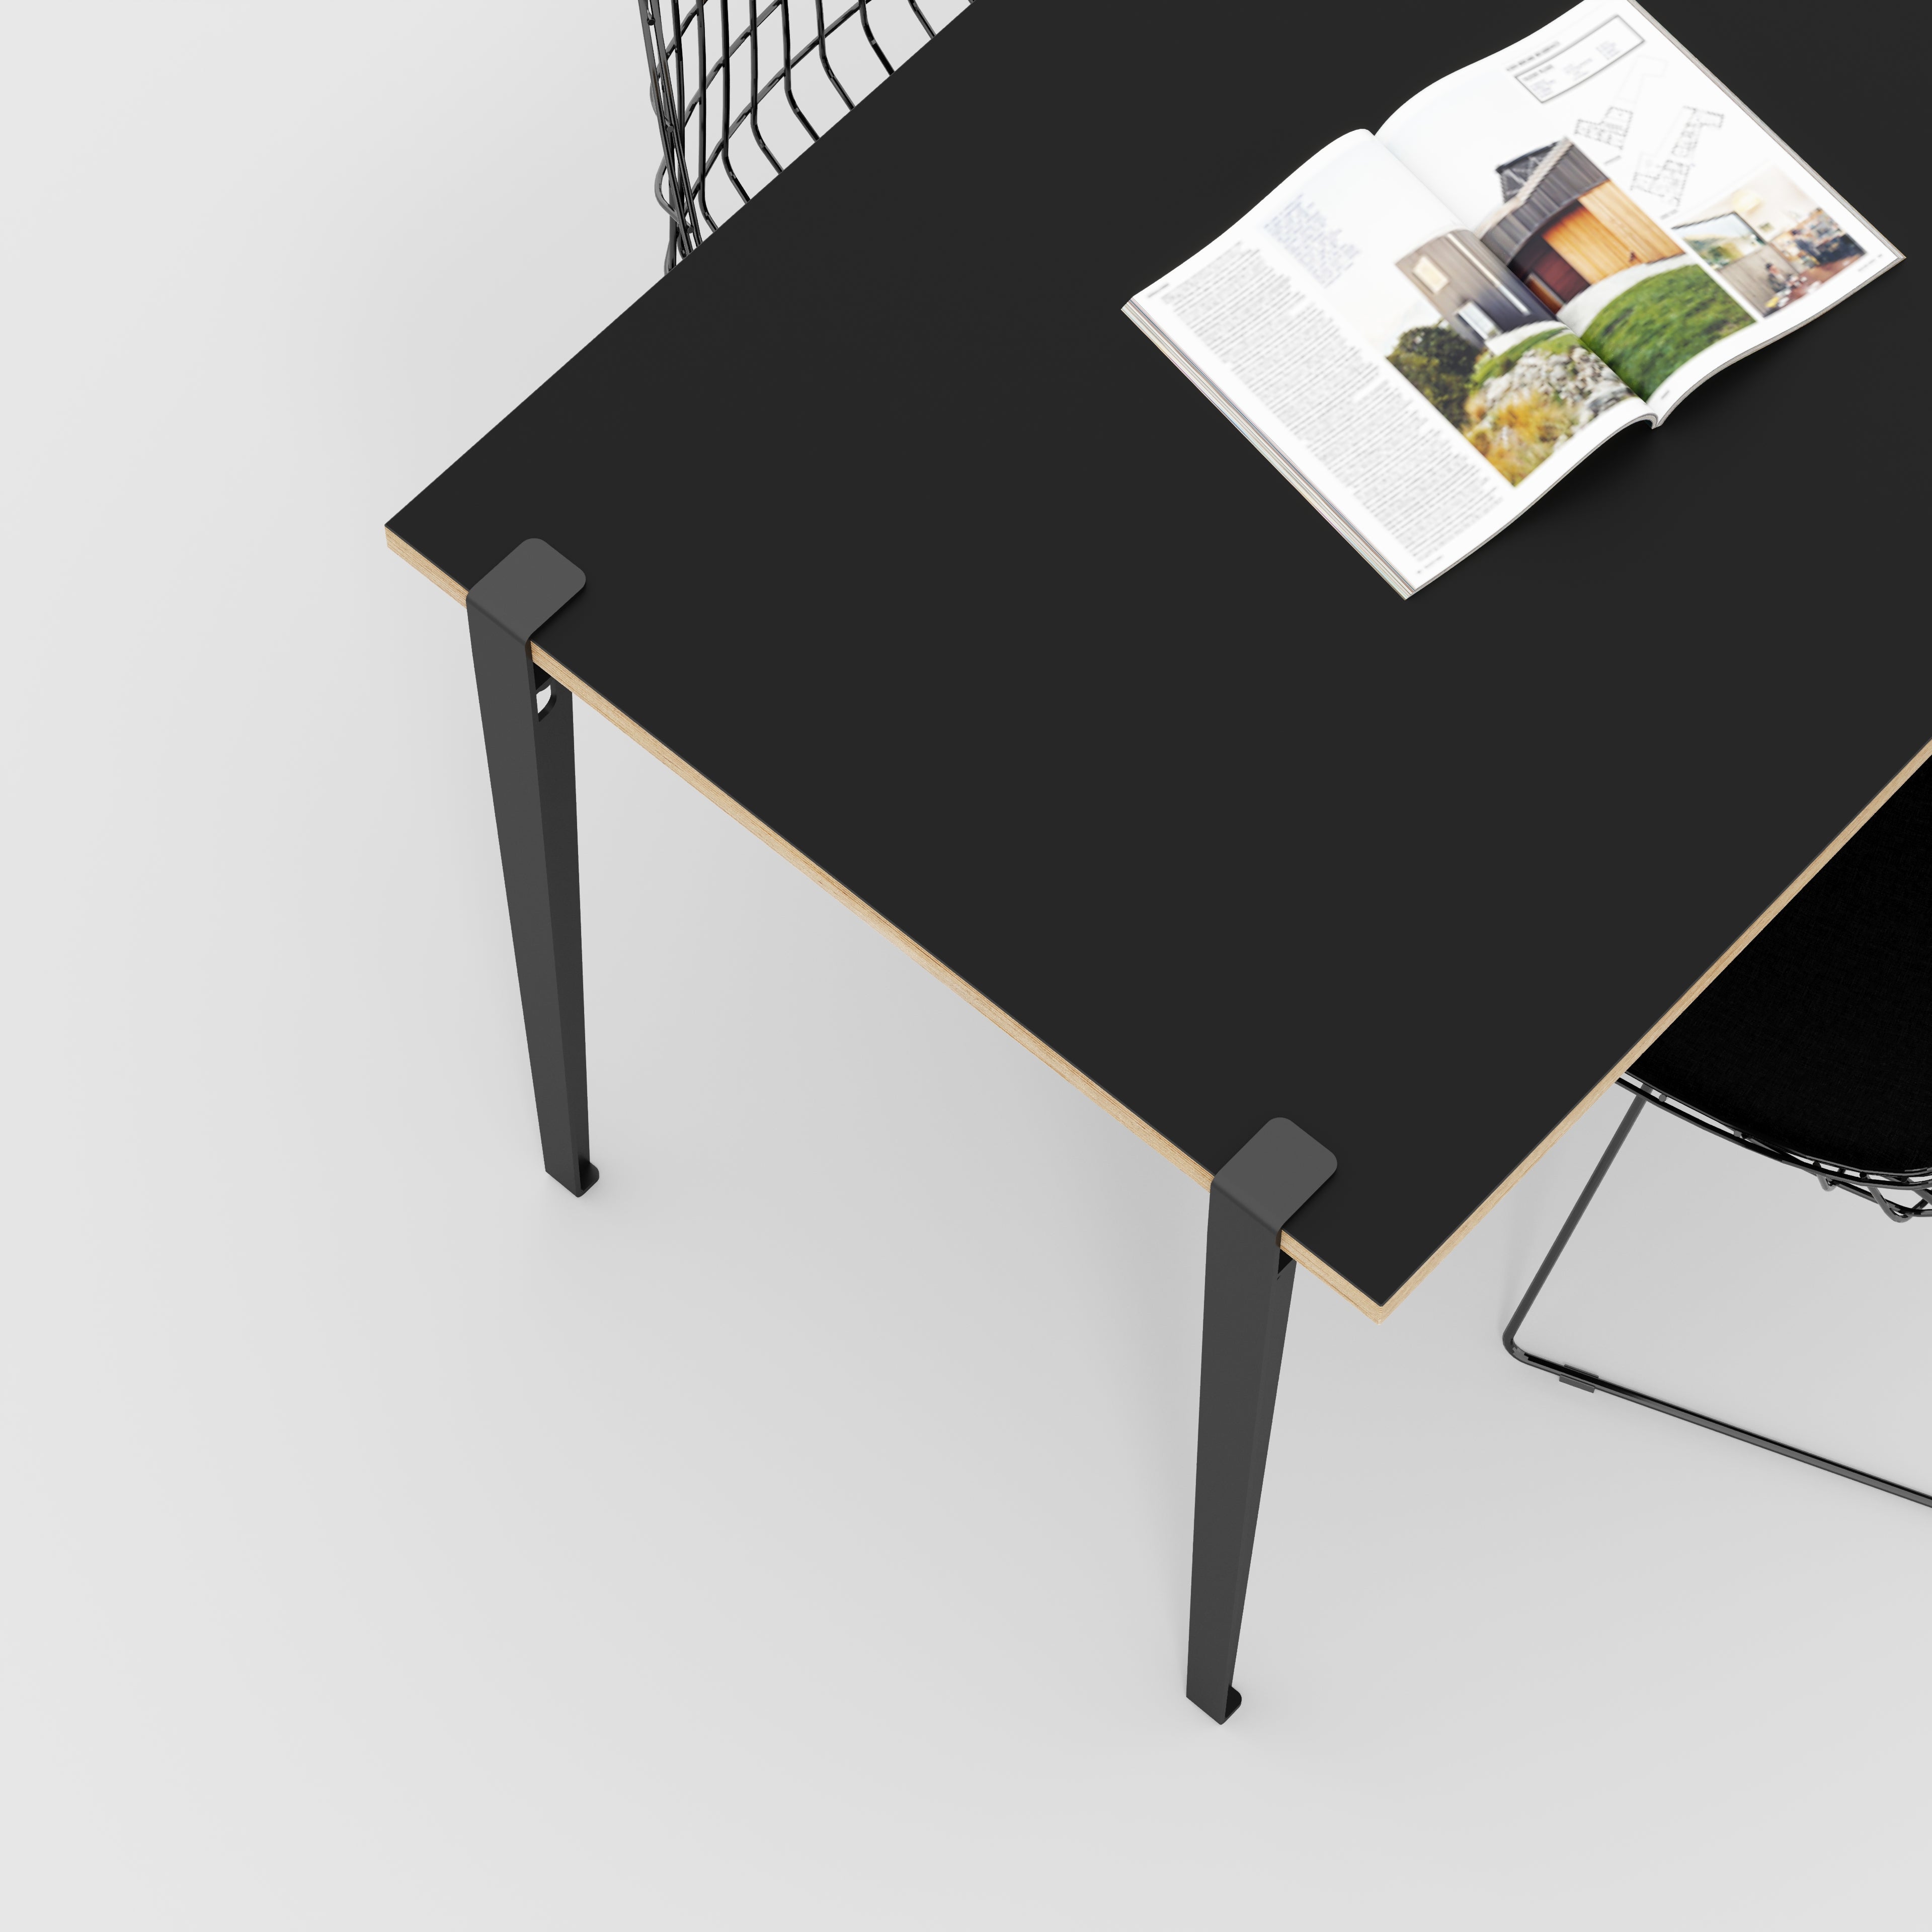 Wall Table with Black Tiptoe Legs and Brackets - Formica Diamond Black - 1200(w) x 800(d) x 750(h)